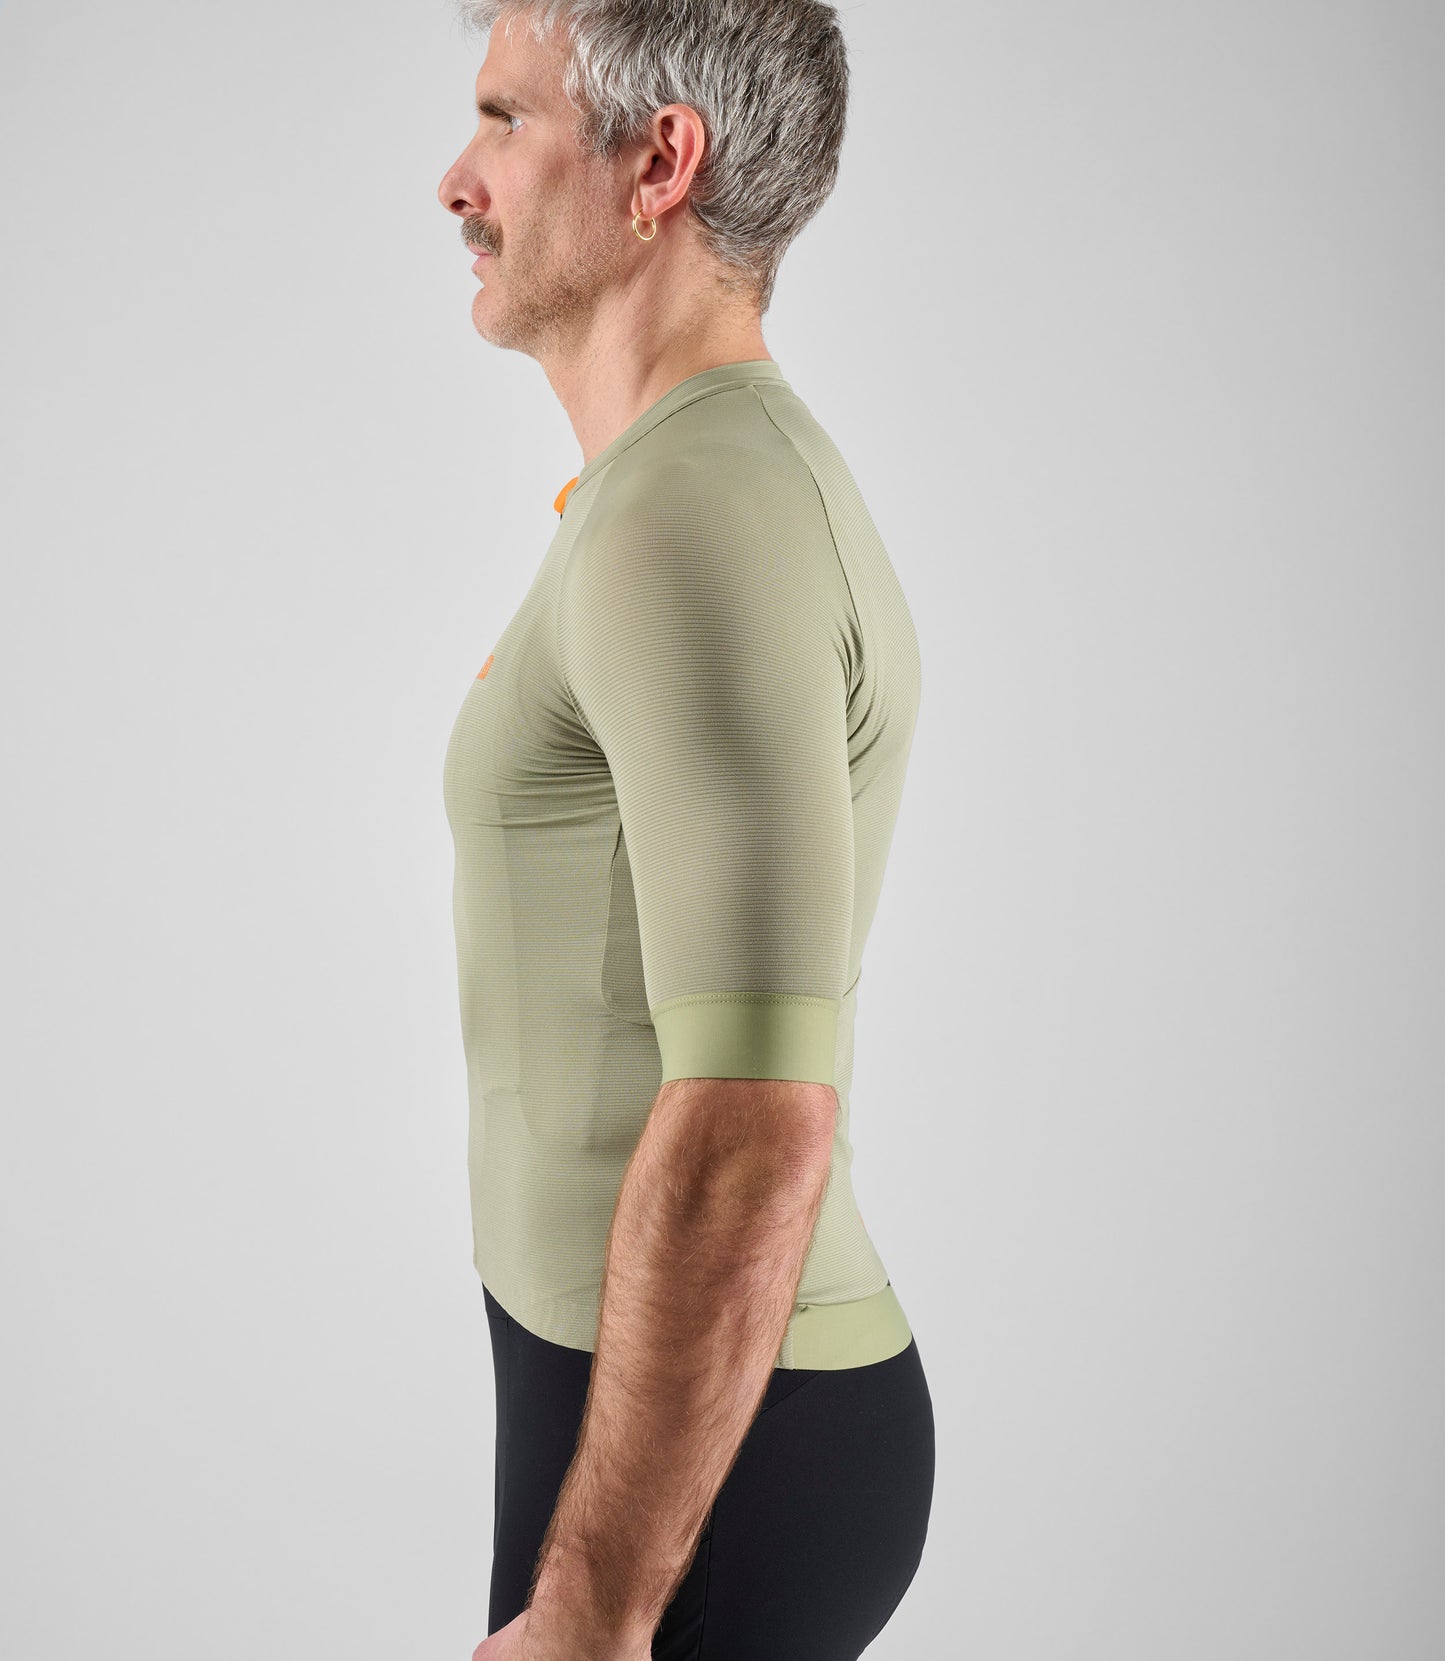 PEDALED Element Lightweight Jersey (Olive Green)